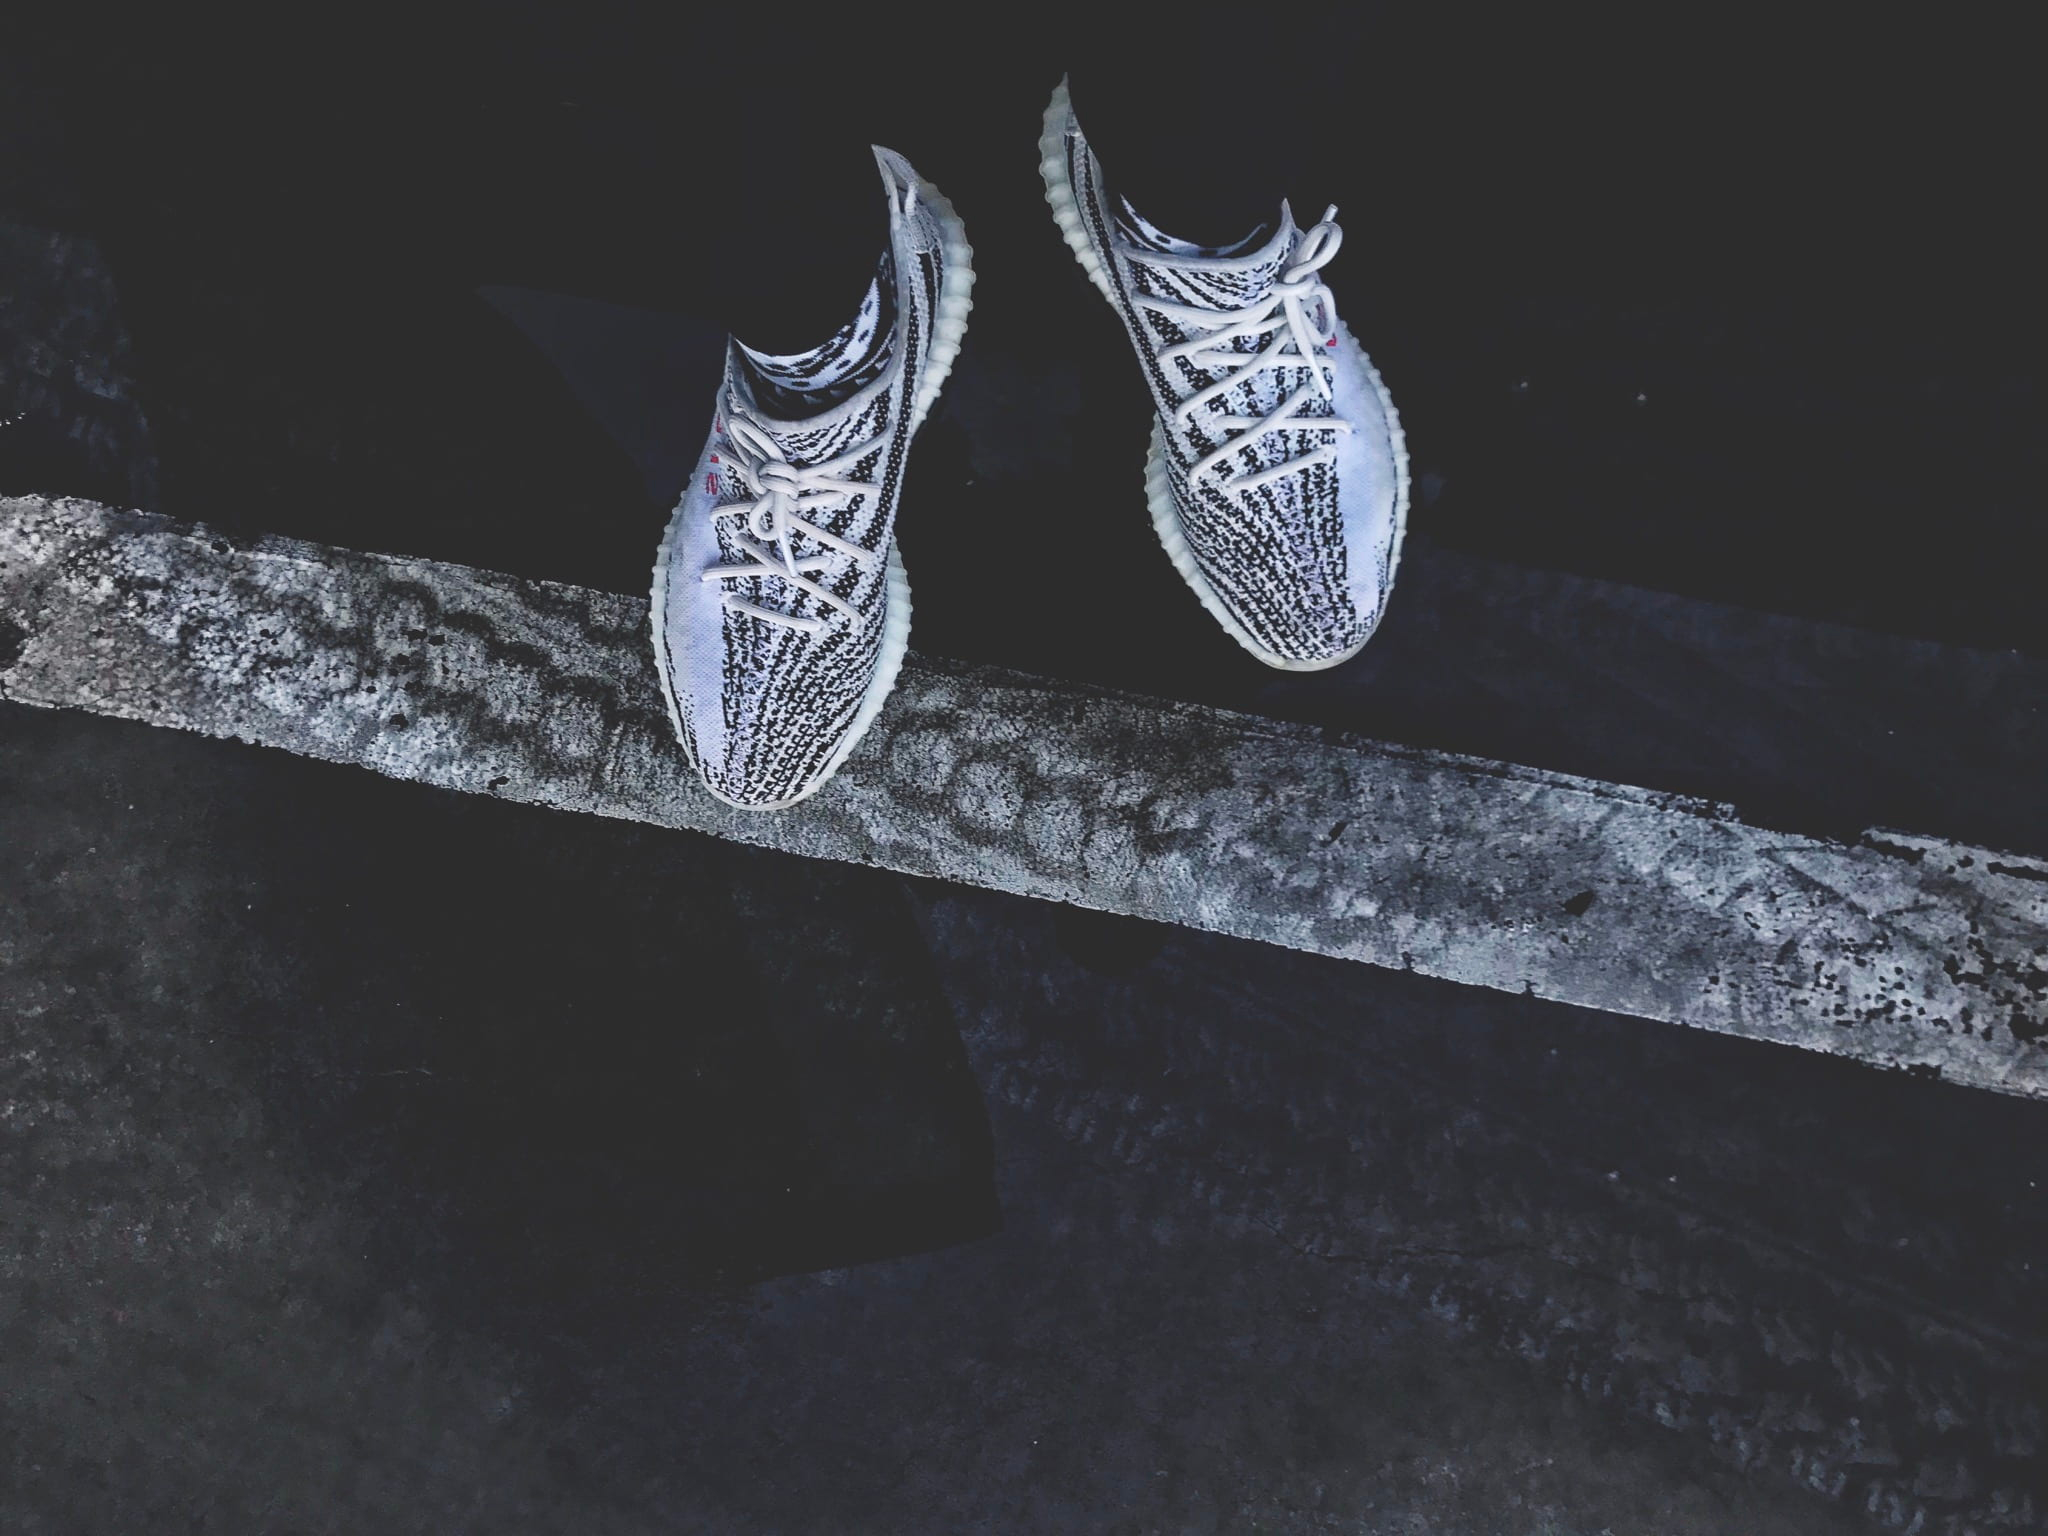 Pair of gray-and-black adidas Yeezy Boost 350’s wallpaper, person standing wearing pair of white-and-black Adidas mid-top sneakers